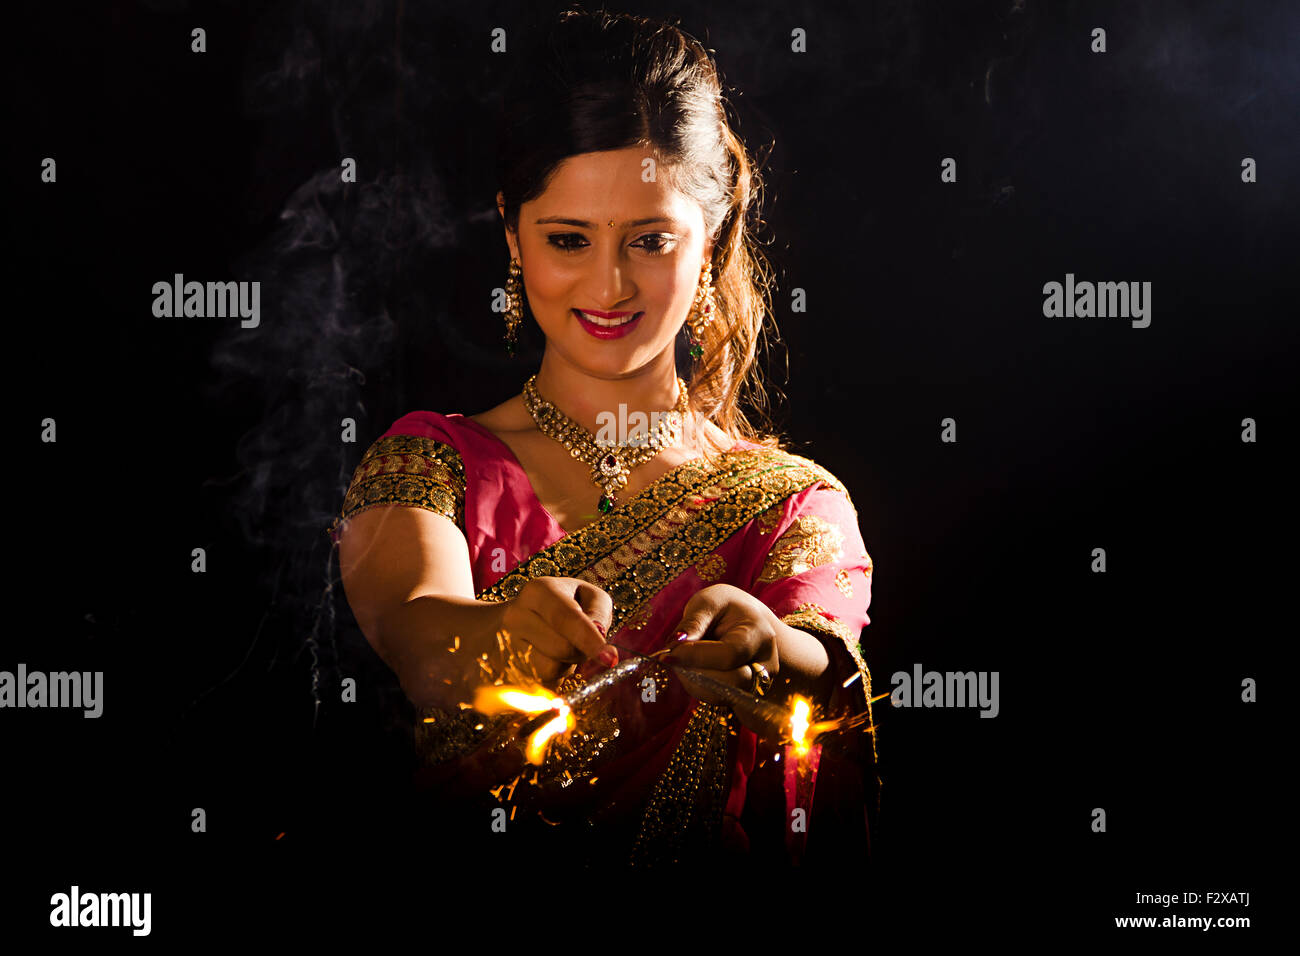 1 indian Adult Woman Diwali Festival Playing Fire Cracker Stock Photo